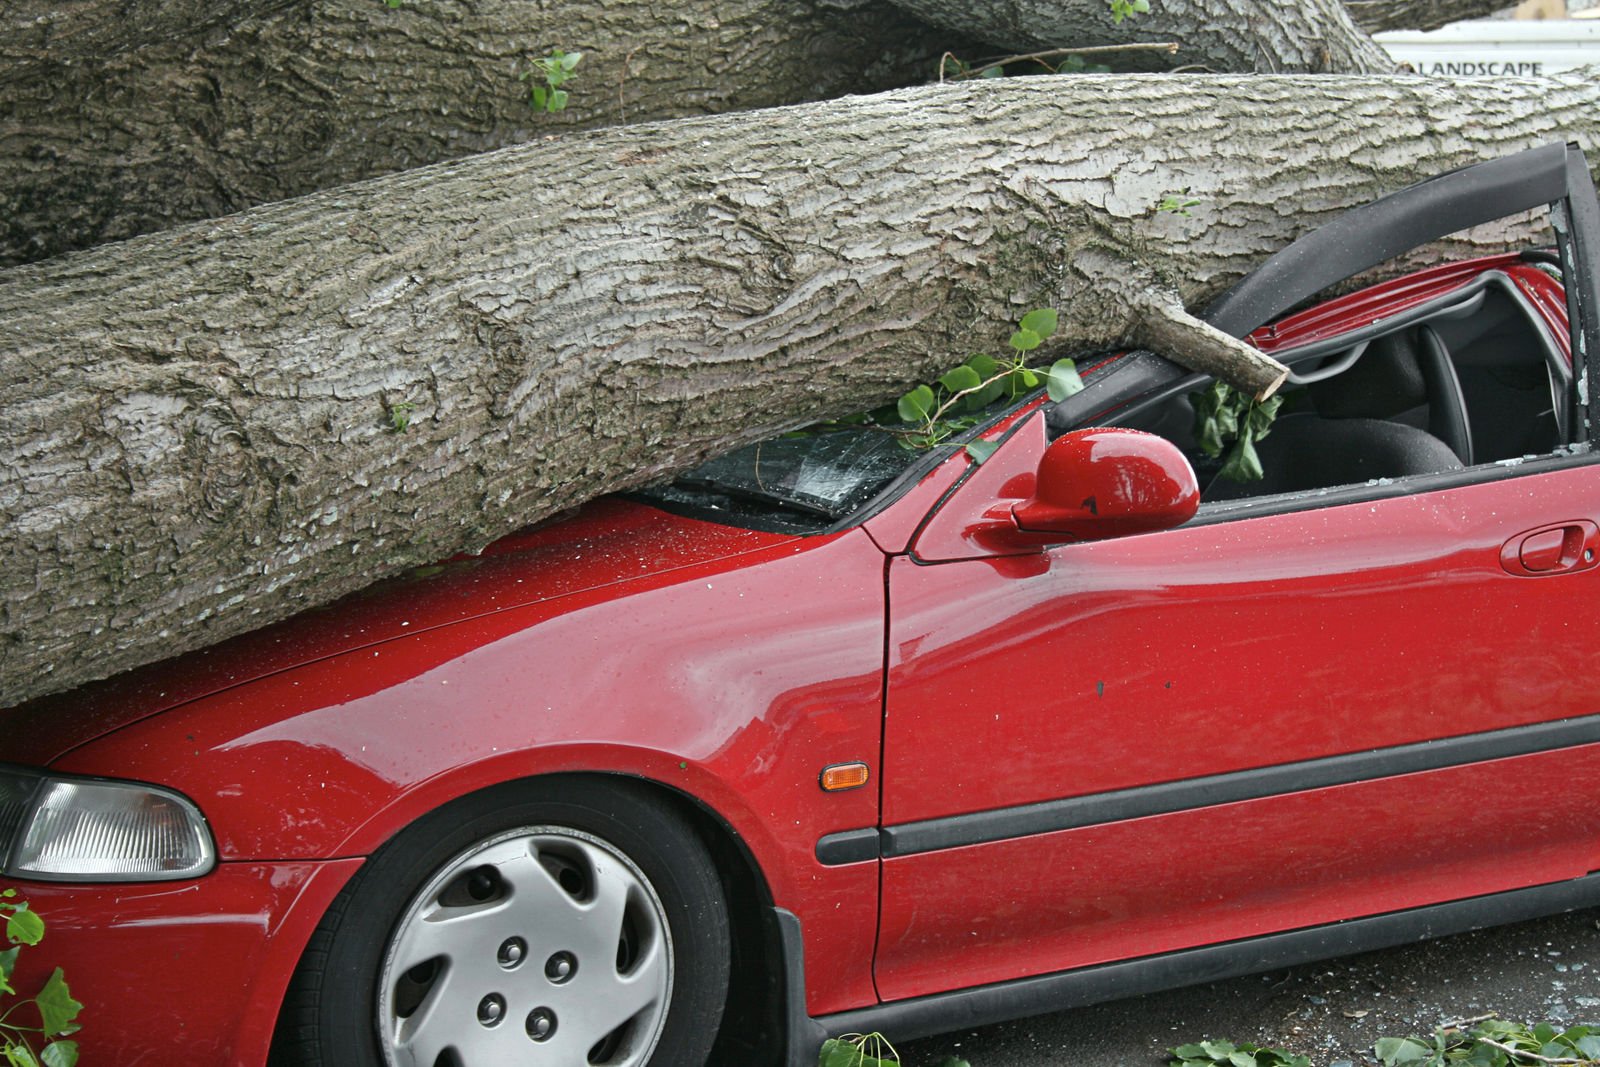 Will my car insurance be affected from a single vehicle accident?